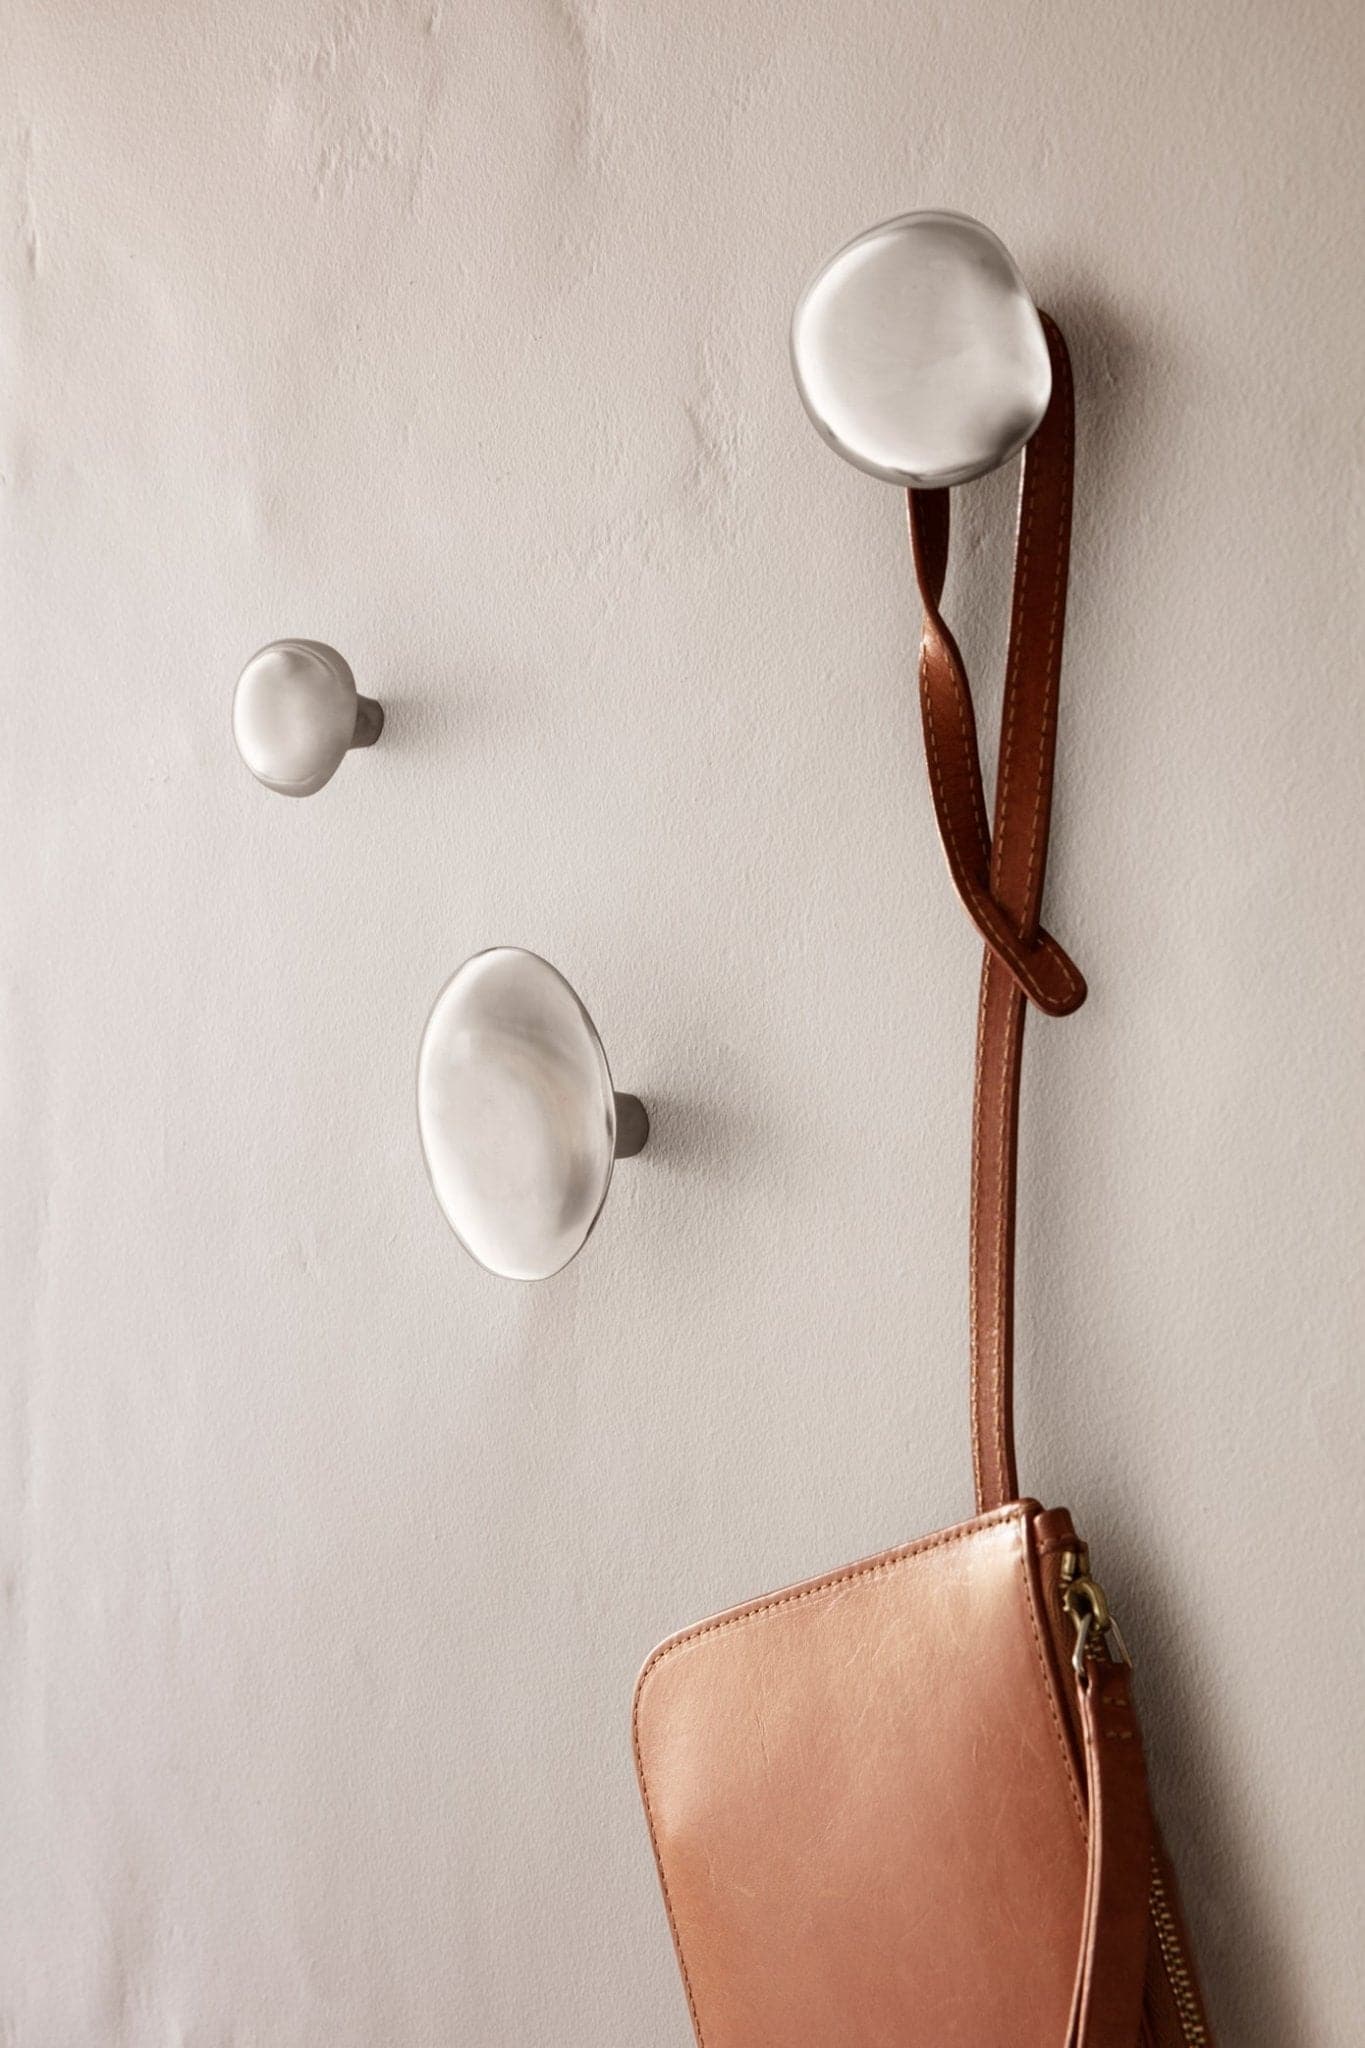 Helena Rohner x Ferm Living Wall Hooks - Stainless Steel - Marz Designs AUFerm Living